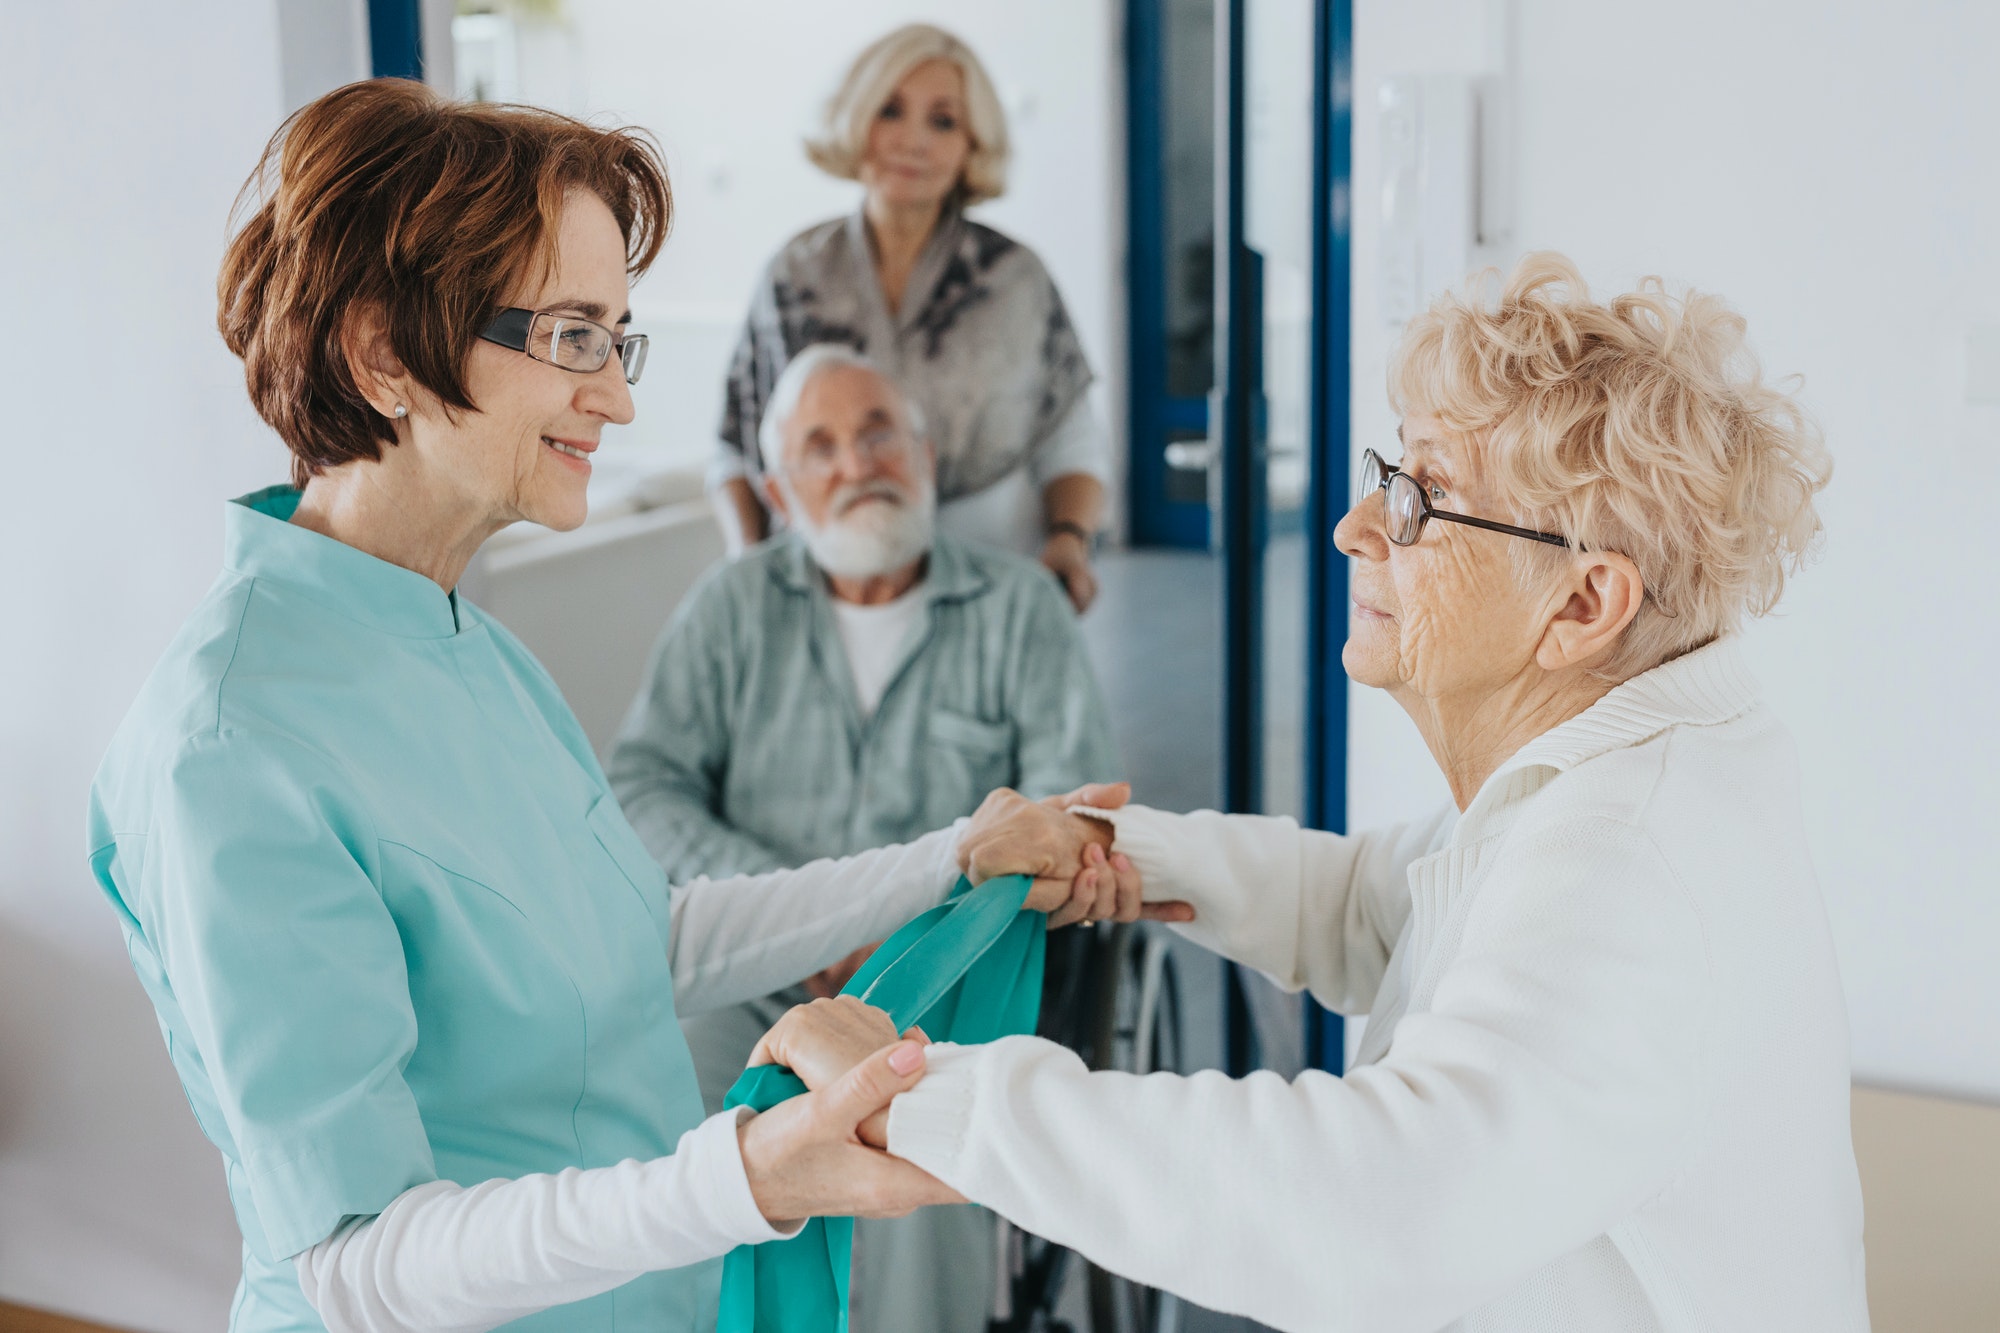 Smiling nurse holds an elderly lady's hands, helping her